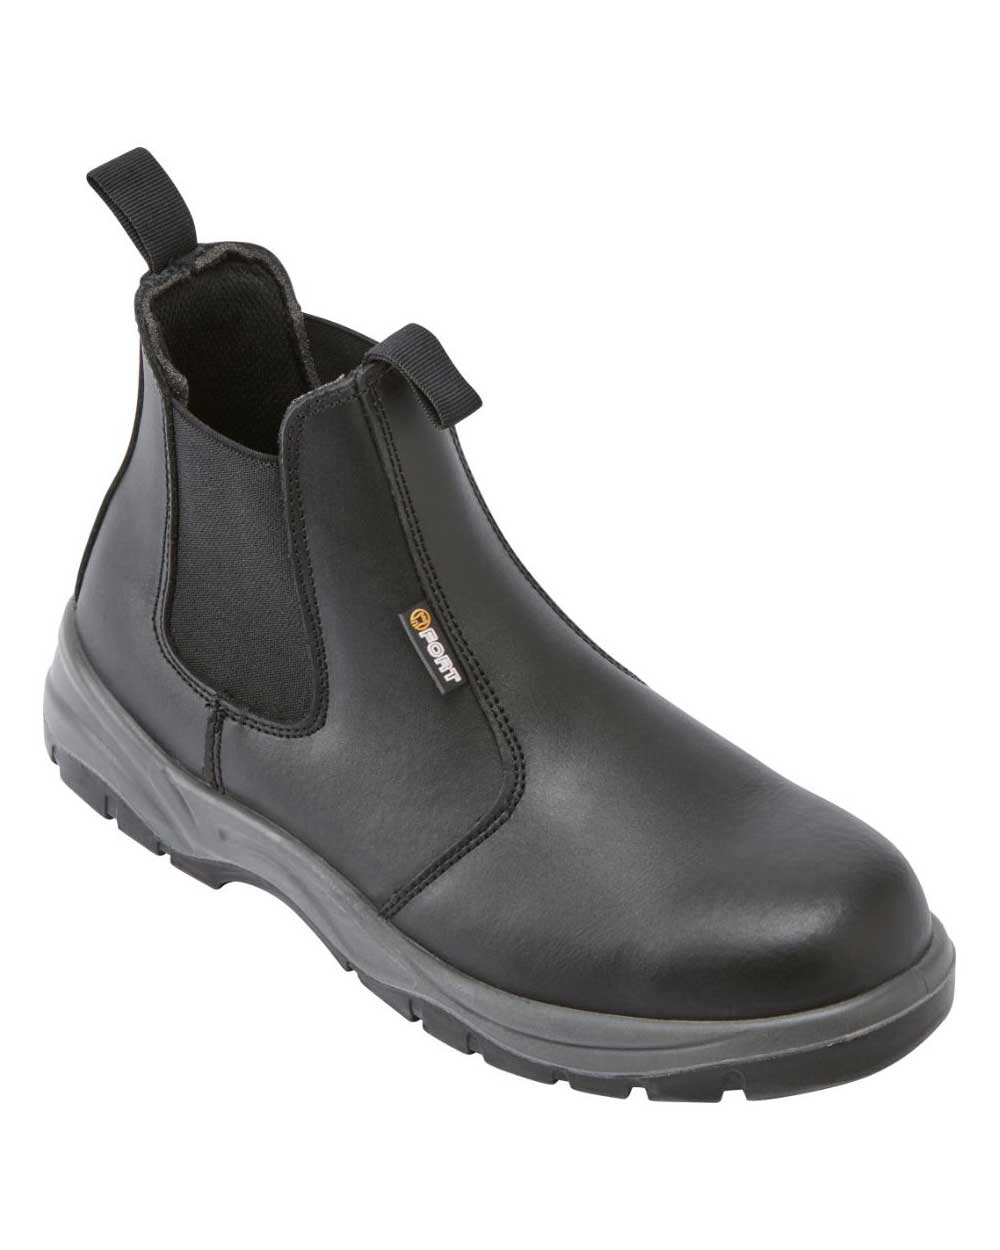 Fort Nelson Safety Dealer Boots Steel toe 